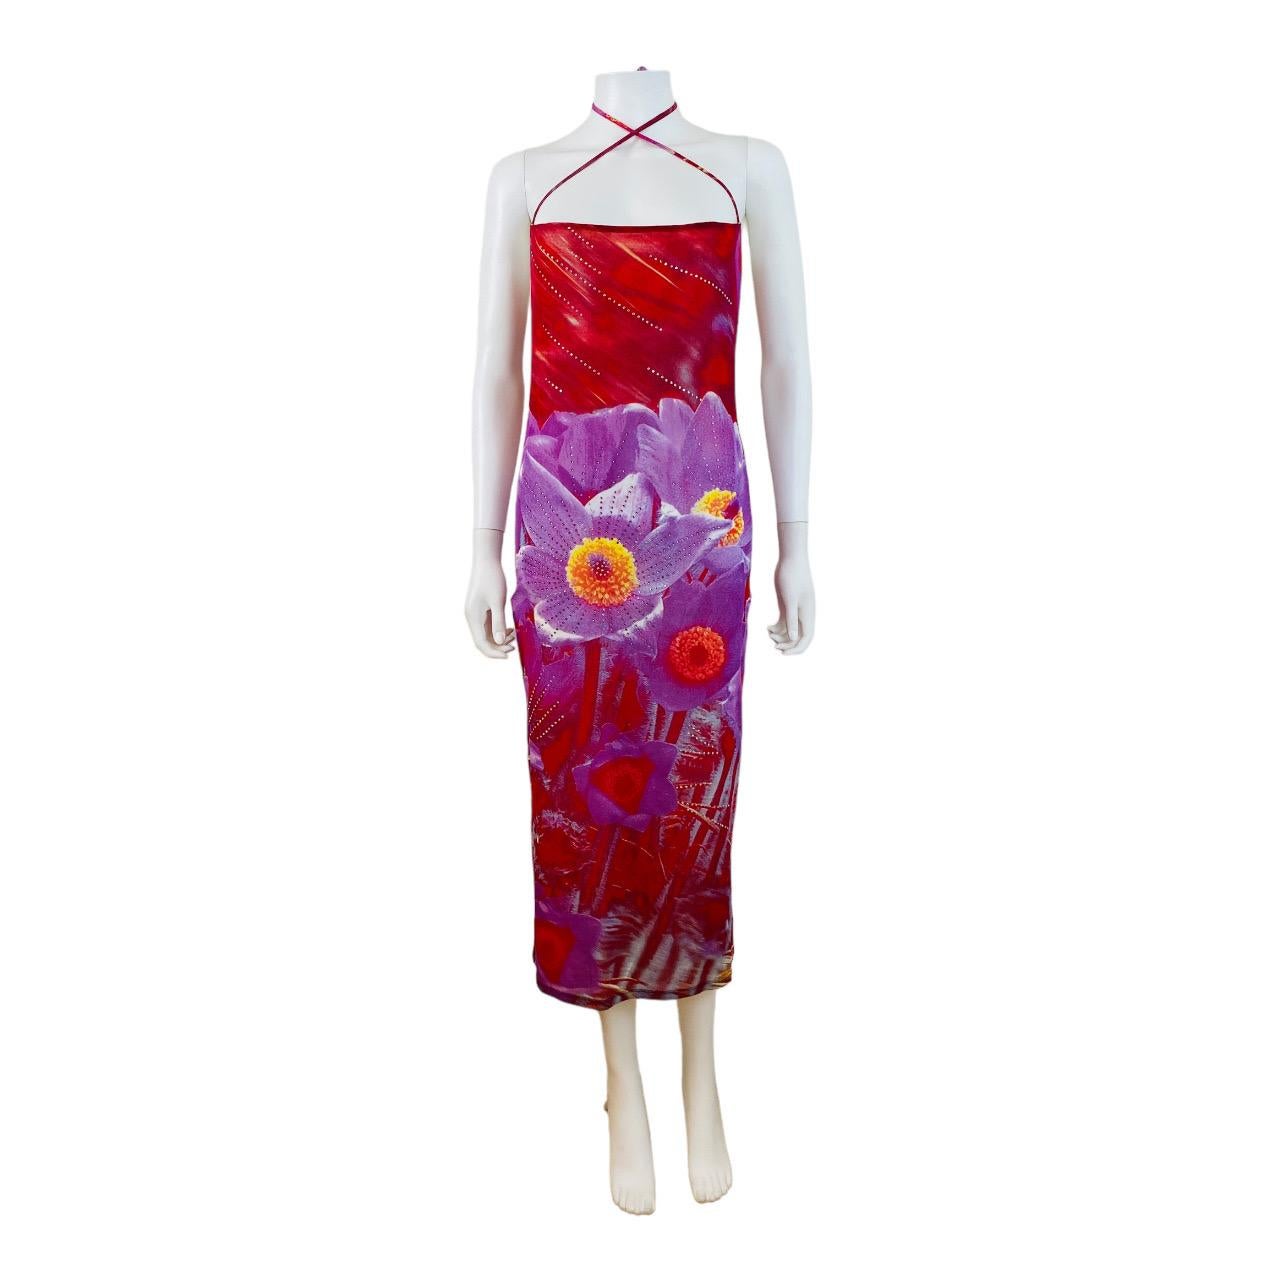 S/S 2000 Roberto Cavalli Dress (shown pinned on mannequin)
Bold red mesh fabric with oversized purple floral print accented with crystals throughout
Square cut across bust with straps that cross across the front of the neck + tie in the back
Fitted